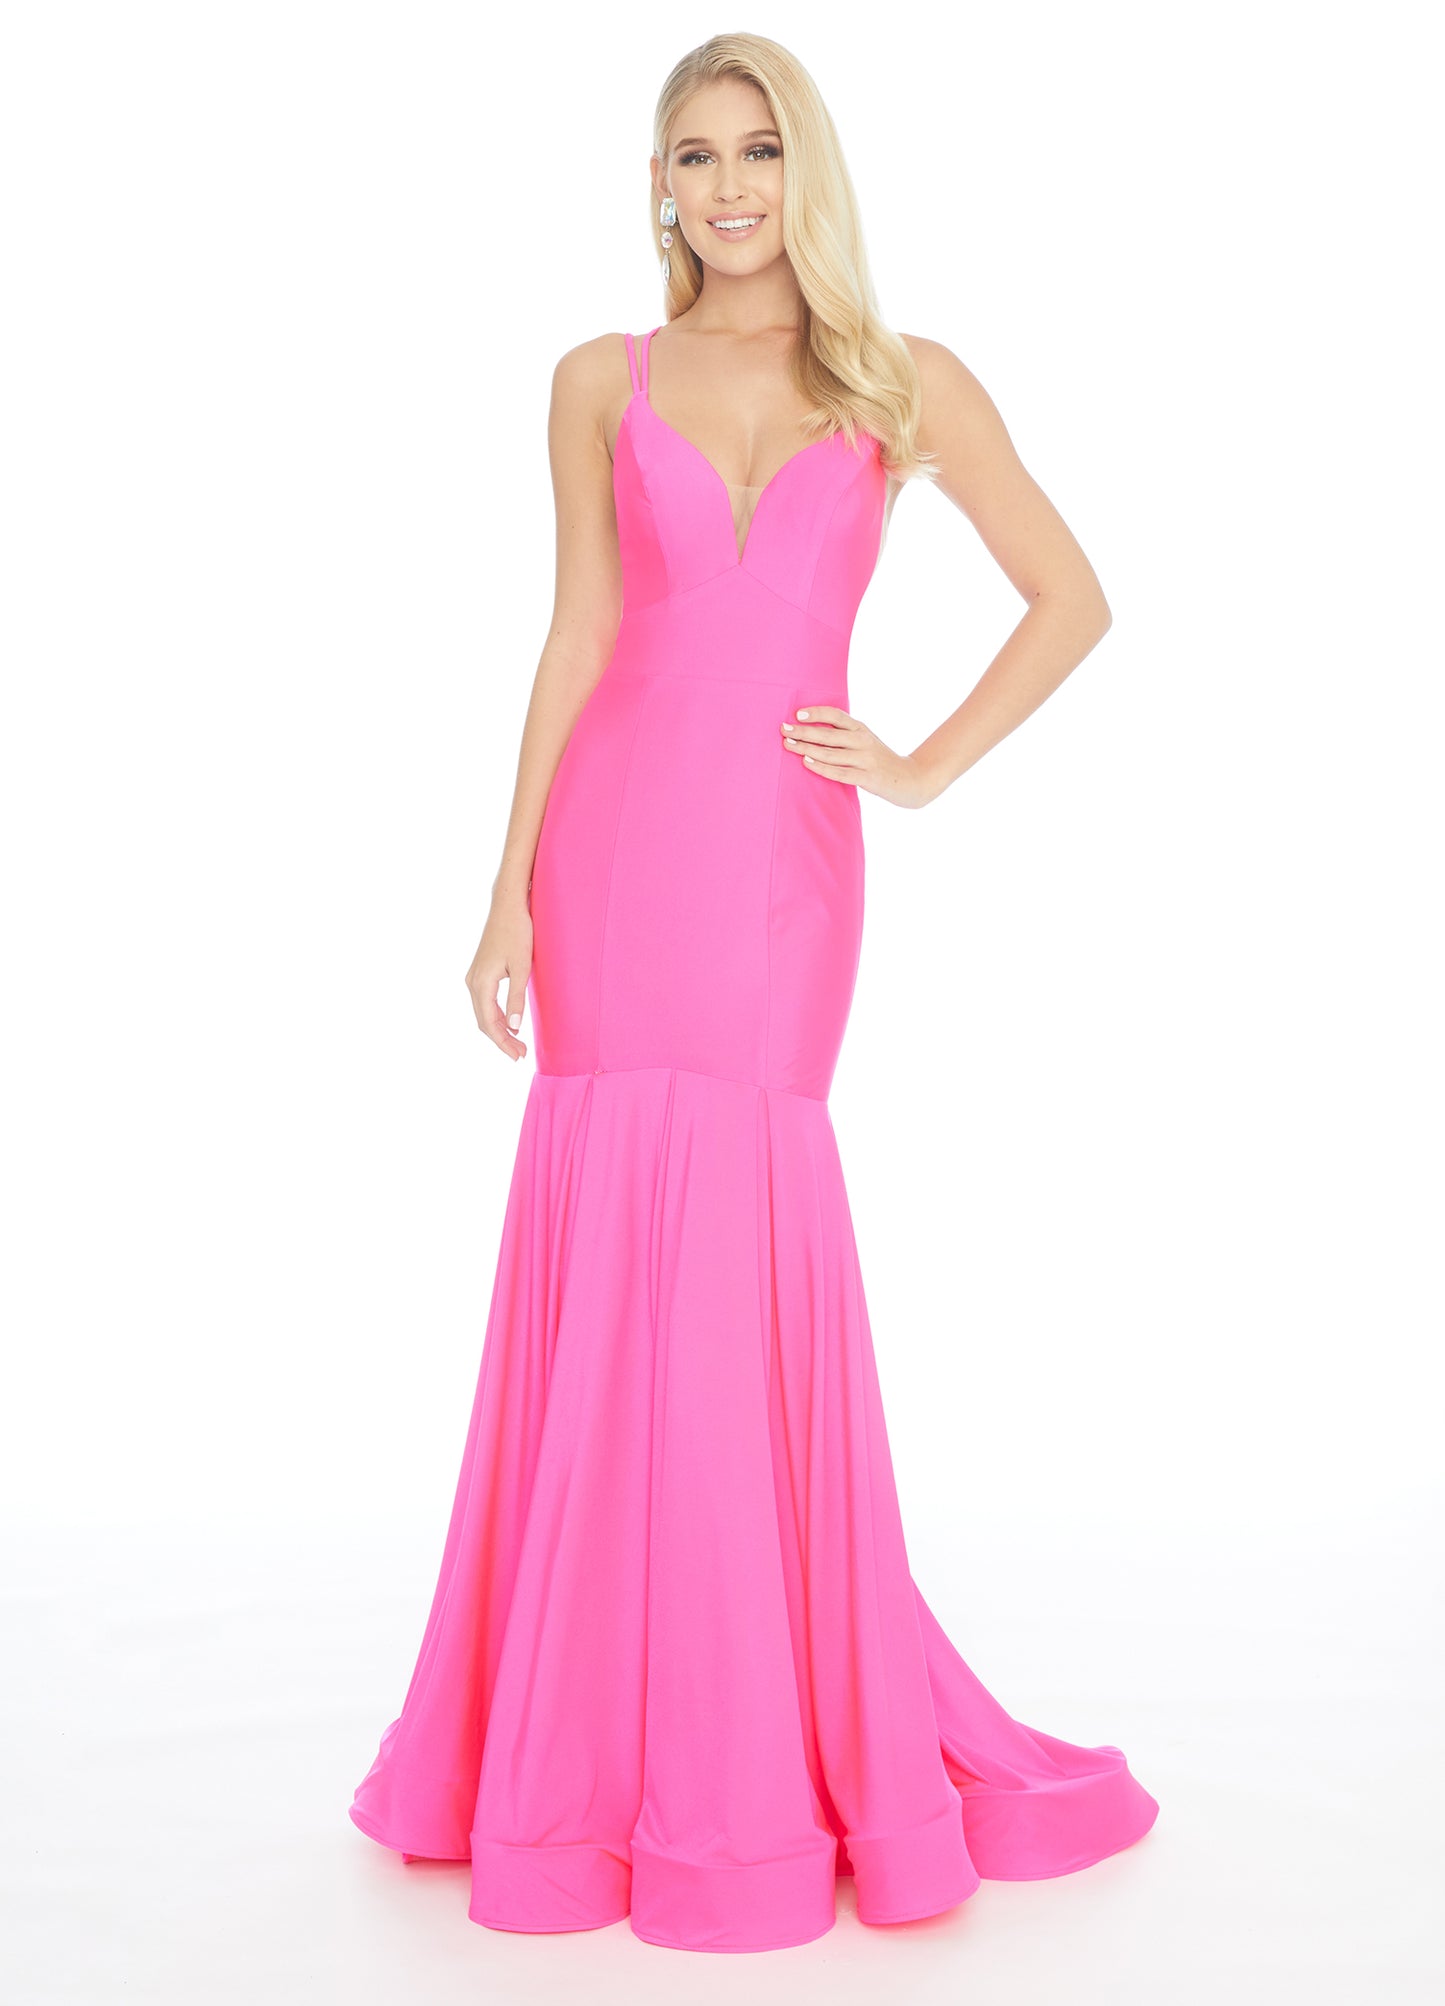 Ashley Lauren 1870 This stunning fit & flare evening gown is sure to turn heads! The bustier is has a v-neckline complete with double spaghetti straps and illusion panel sides. The skirt embellished with box-pleats and sweeping train. Racer Back Jersey  Available Sizes: 12  Available Colors: Hot Pink